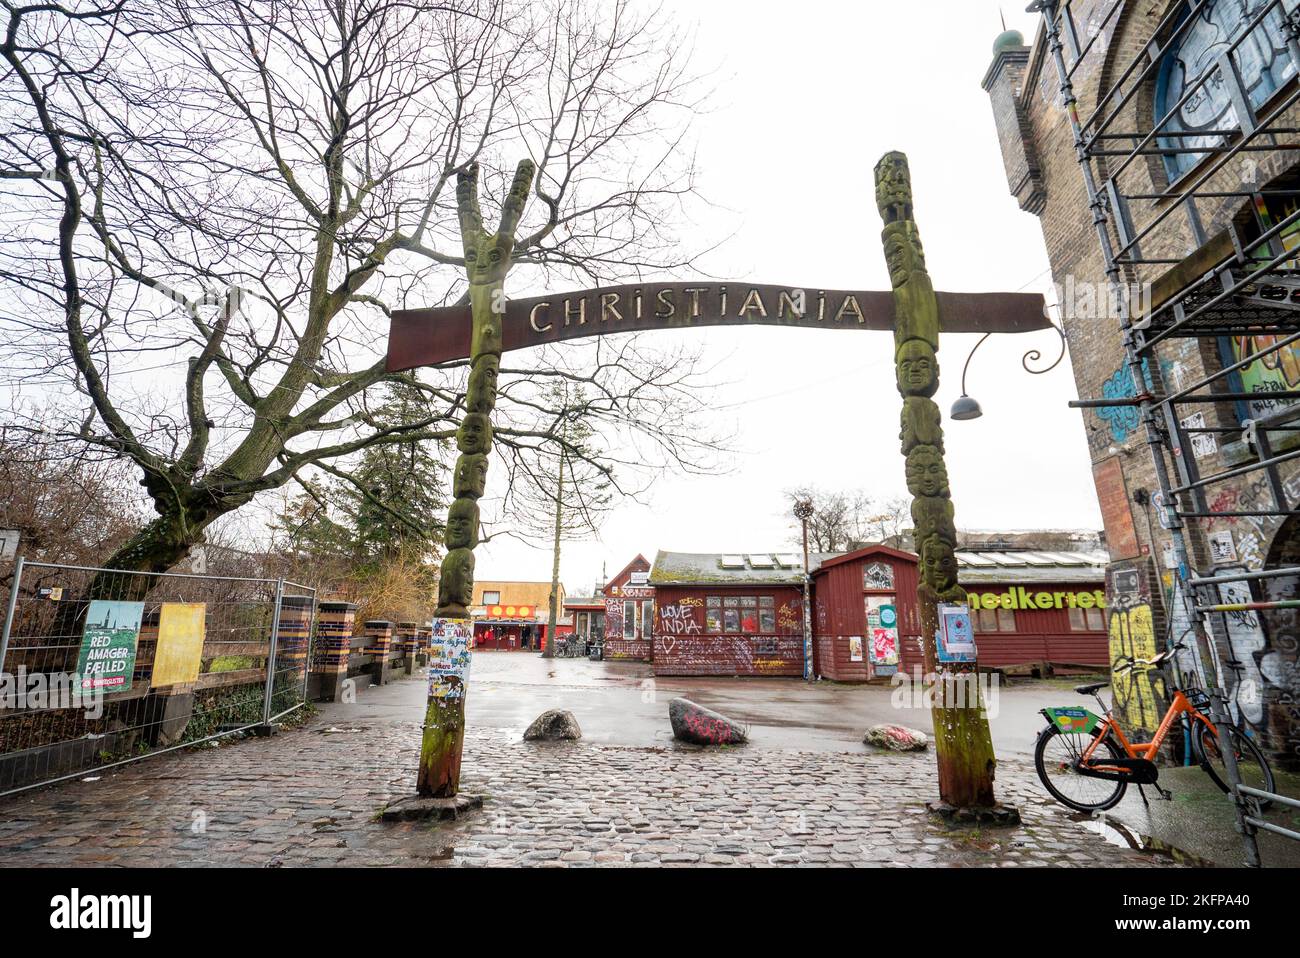 The entrance to Christiania freetown, Copenhagen, Denmark. Freetown Christiania- an intentional community, commune and micronation in Christianshavn. Stock Photo